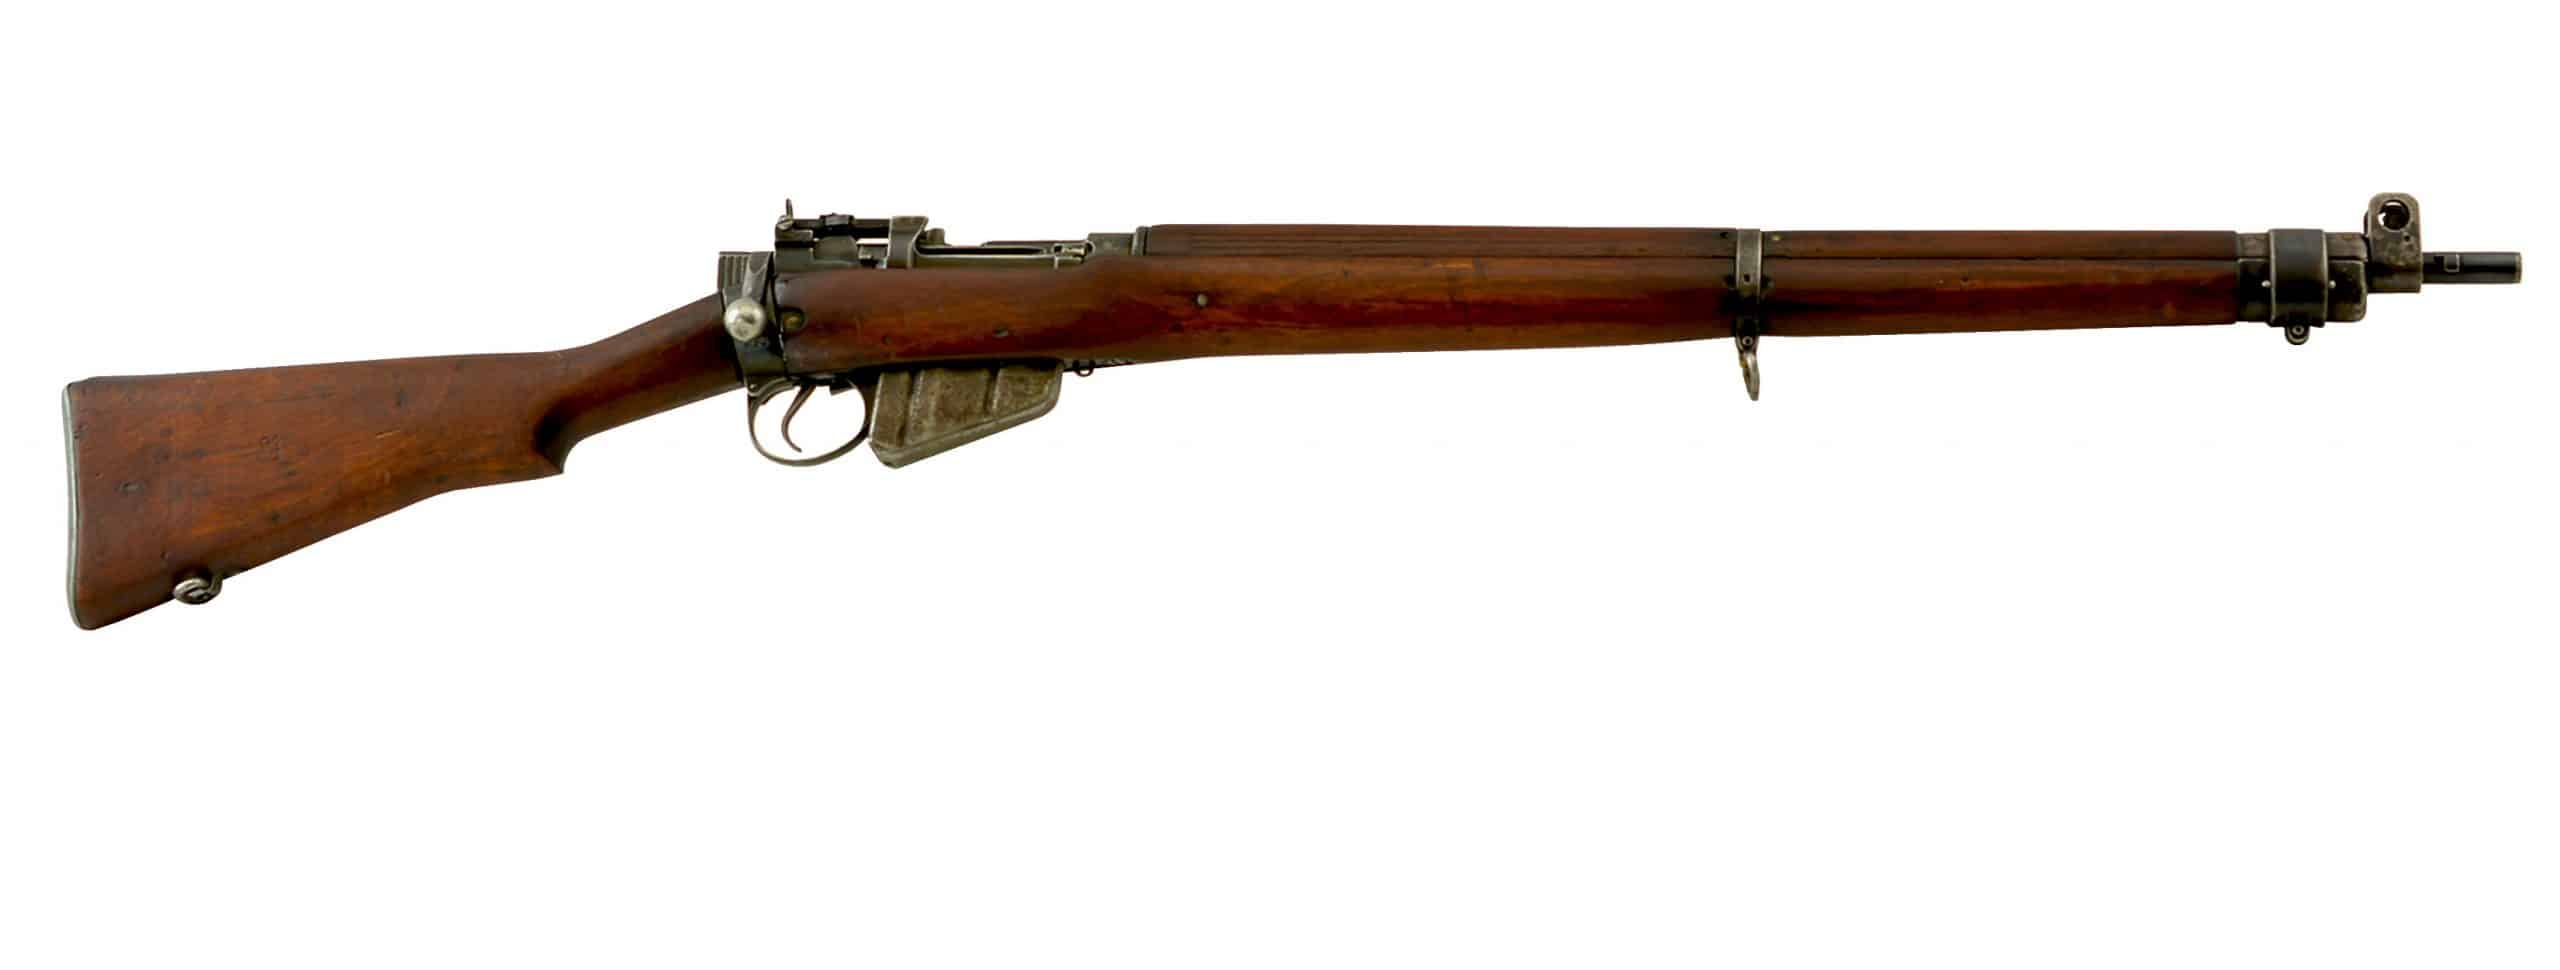 Rifles-1945-Lee-Enfield-No-4-MKI-1943-to-1955-scaled